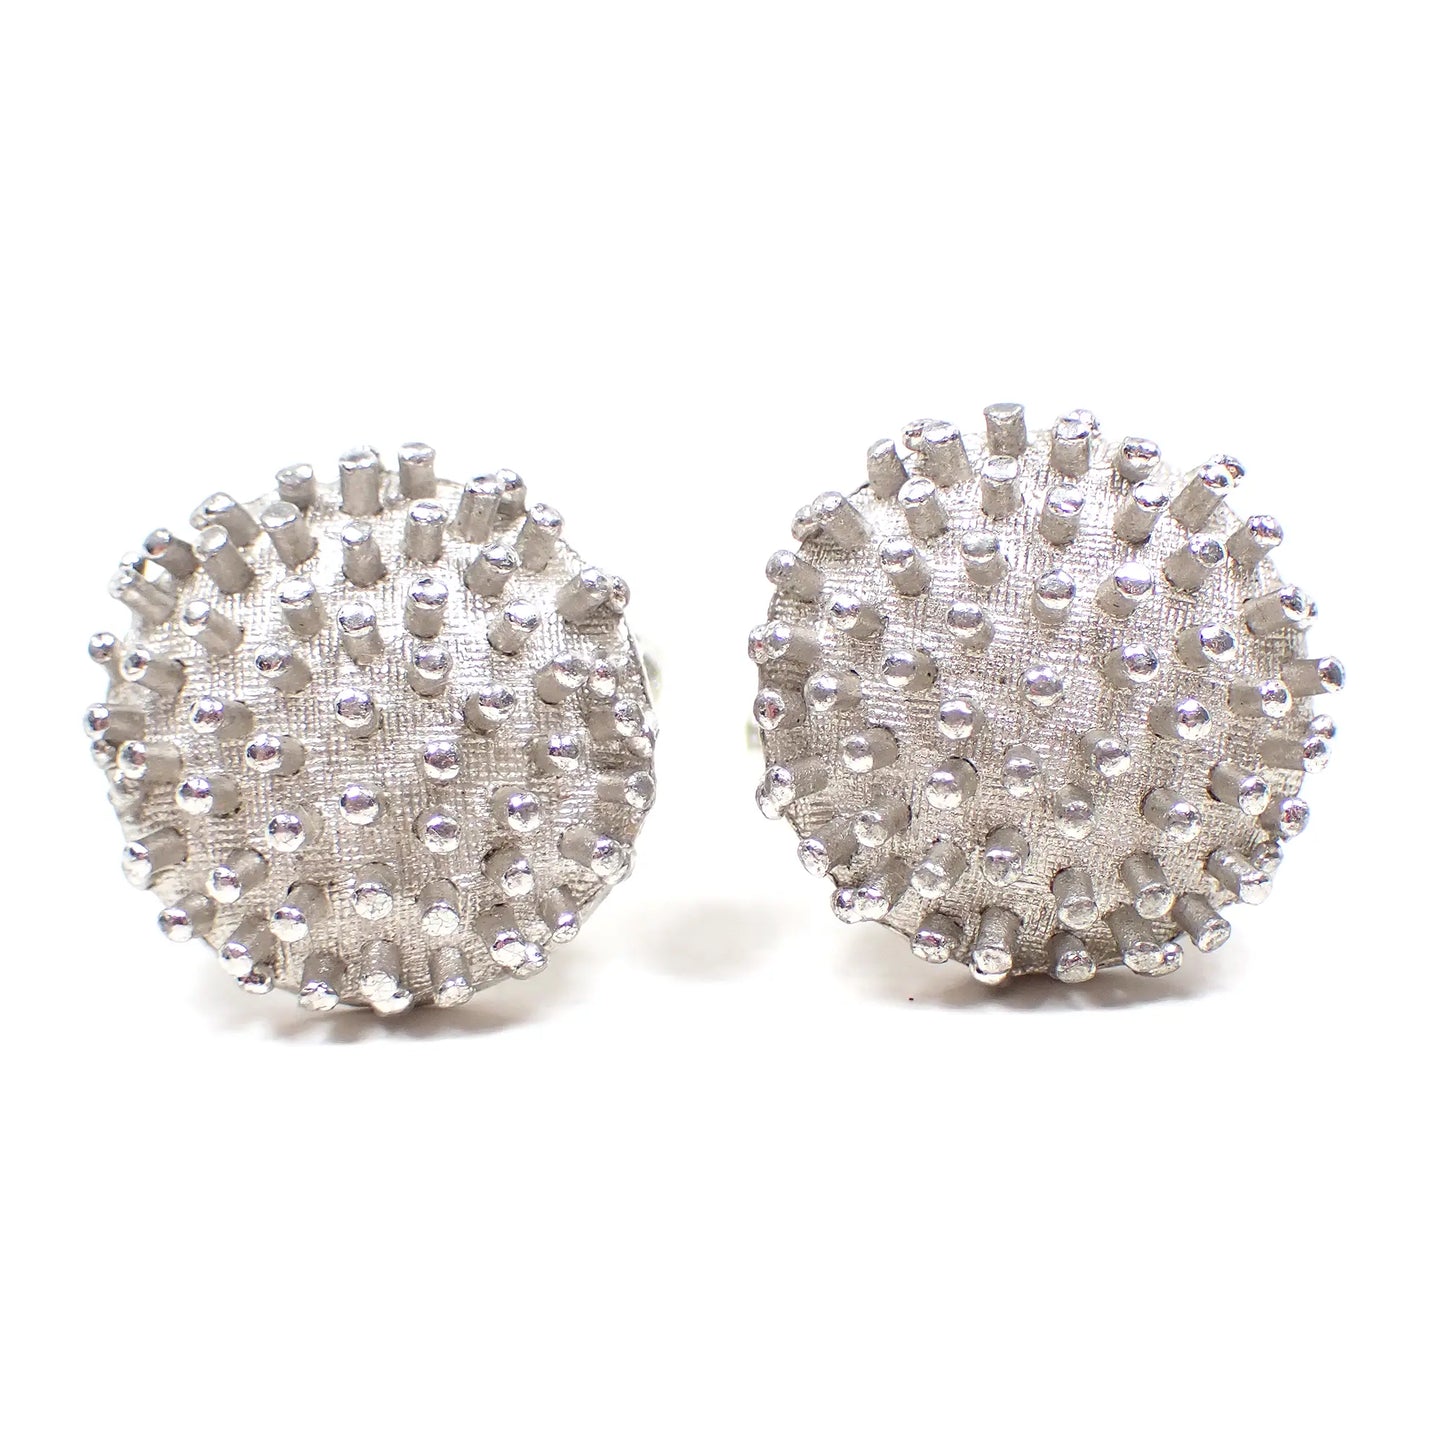 Front view of the Mid Century vintage Dante cufflinks. They are round and silver tone in color with a Brutalist style bumpy textured pattern along the front.